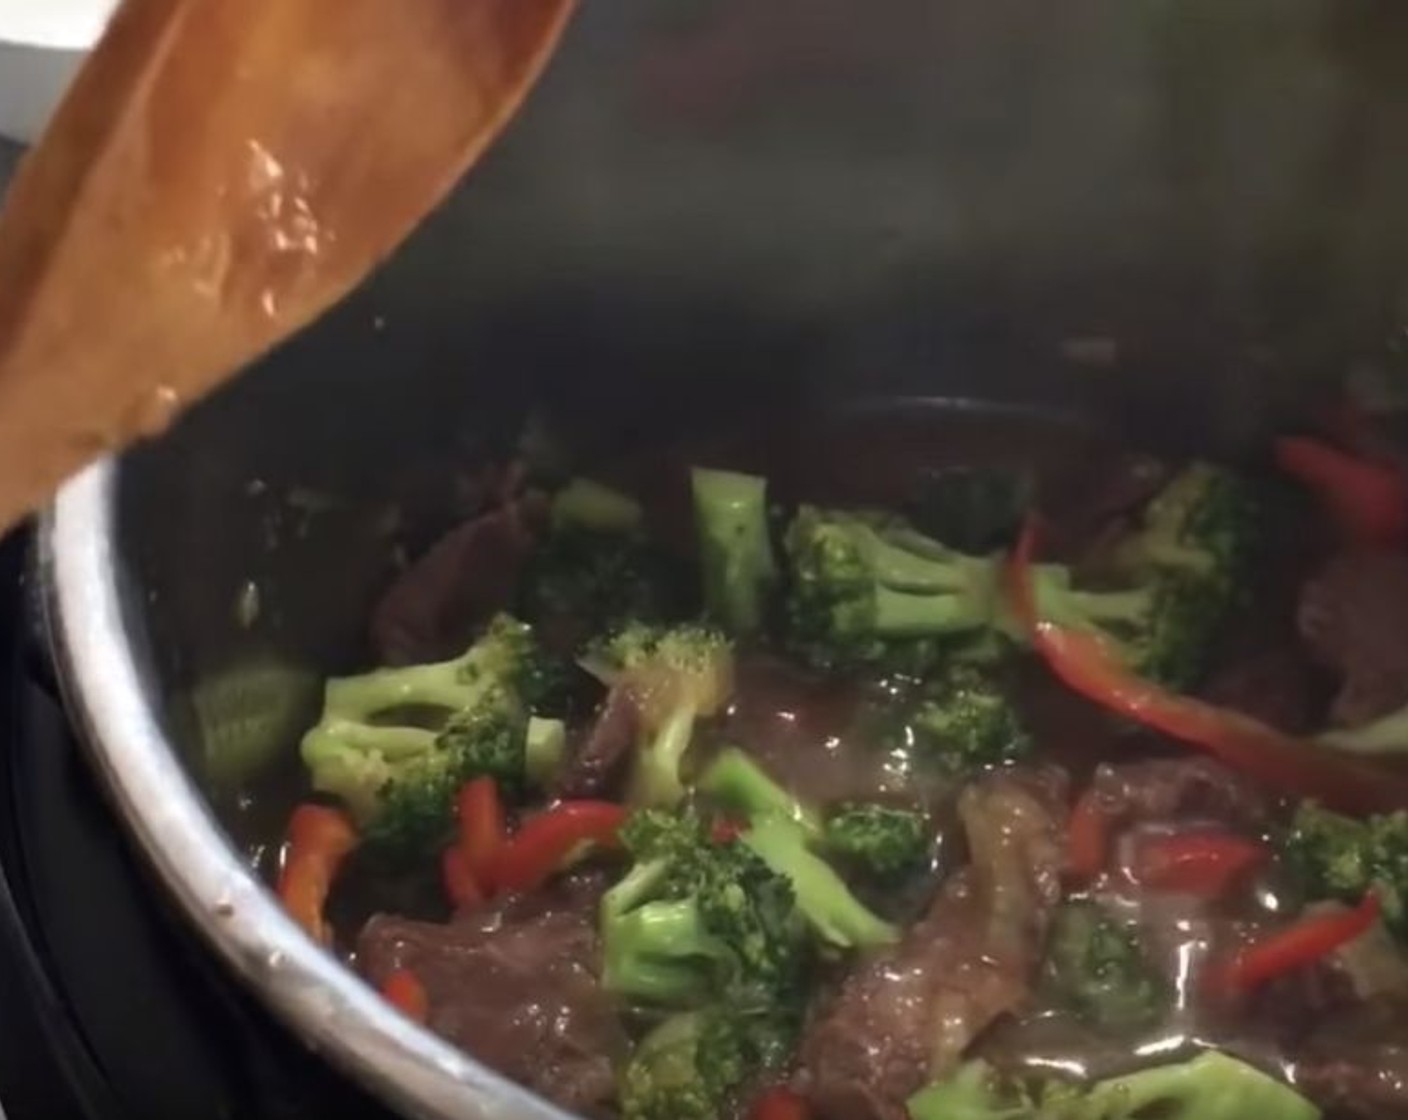 step 6 Add Broccoli Florets (2 1/2 cups). Stir to combine. Cover and cook for 1-2 minutes.